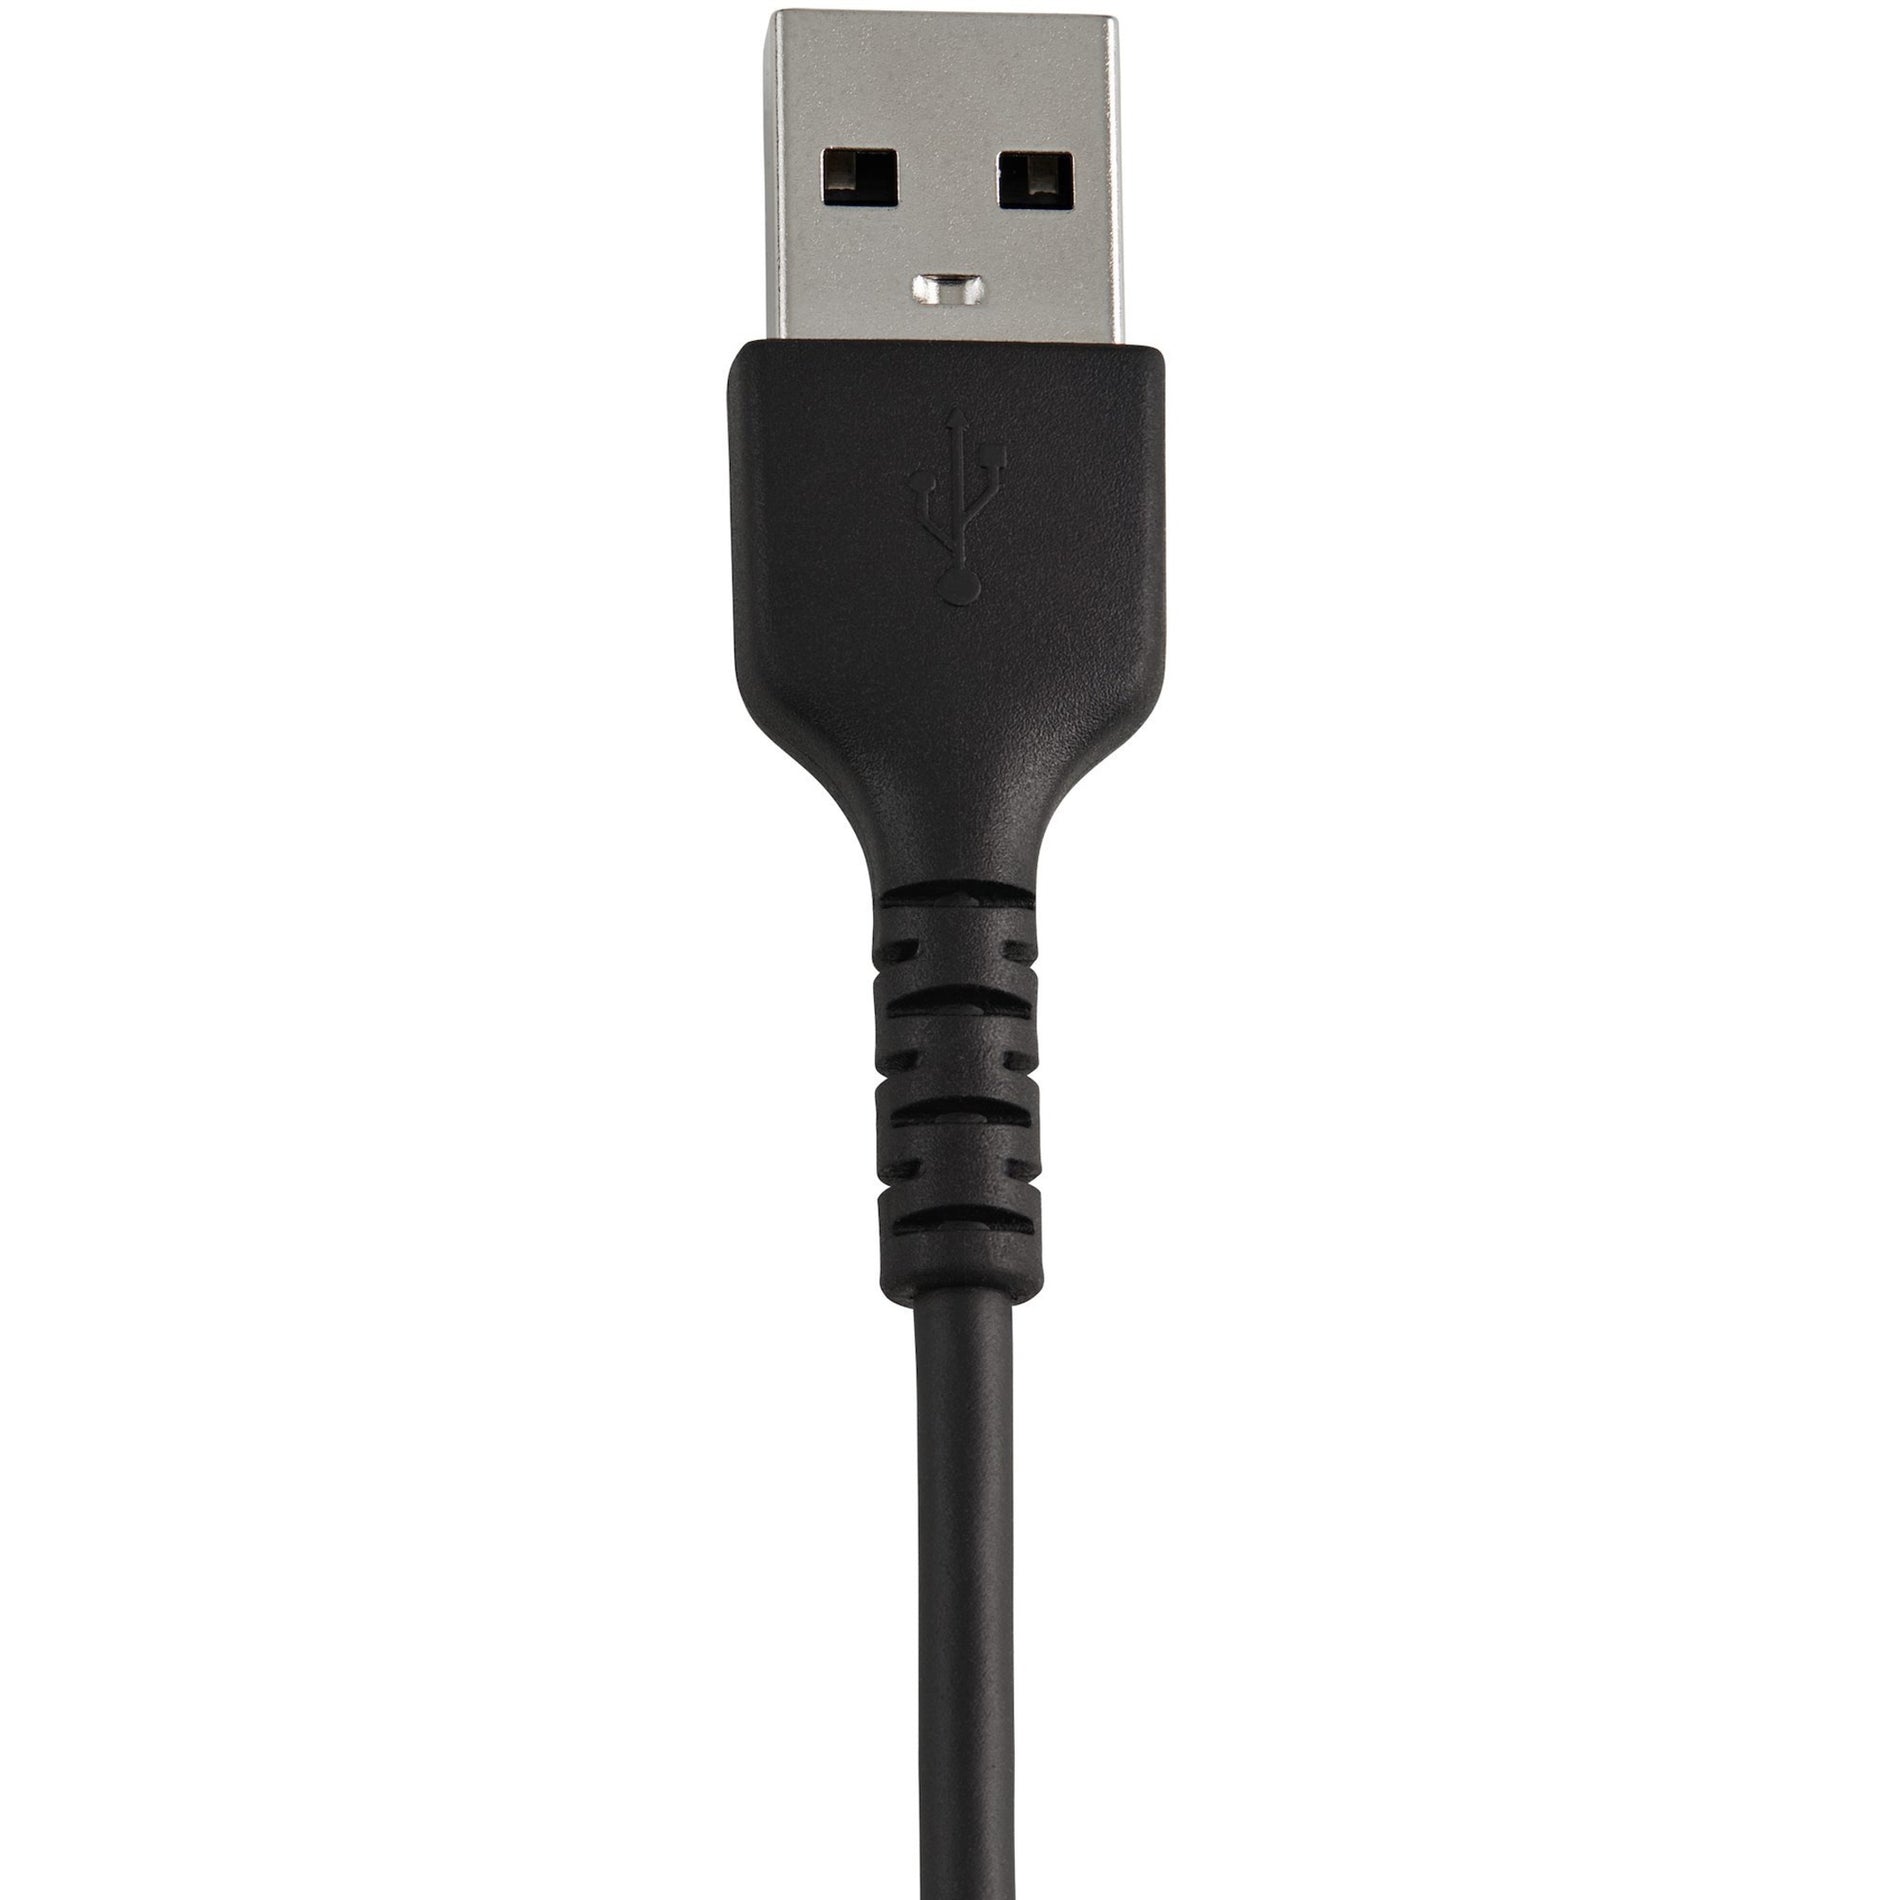 StarTech.com RUSBLTMM30CMB Lightning/USB Data Transfer Cable, Durable Black iPhone iPad Charge/Sync Charger Cord w/ Aramid Fiber, MFI Certified